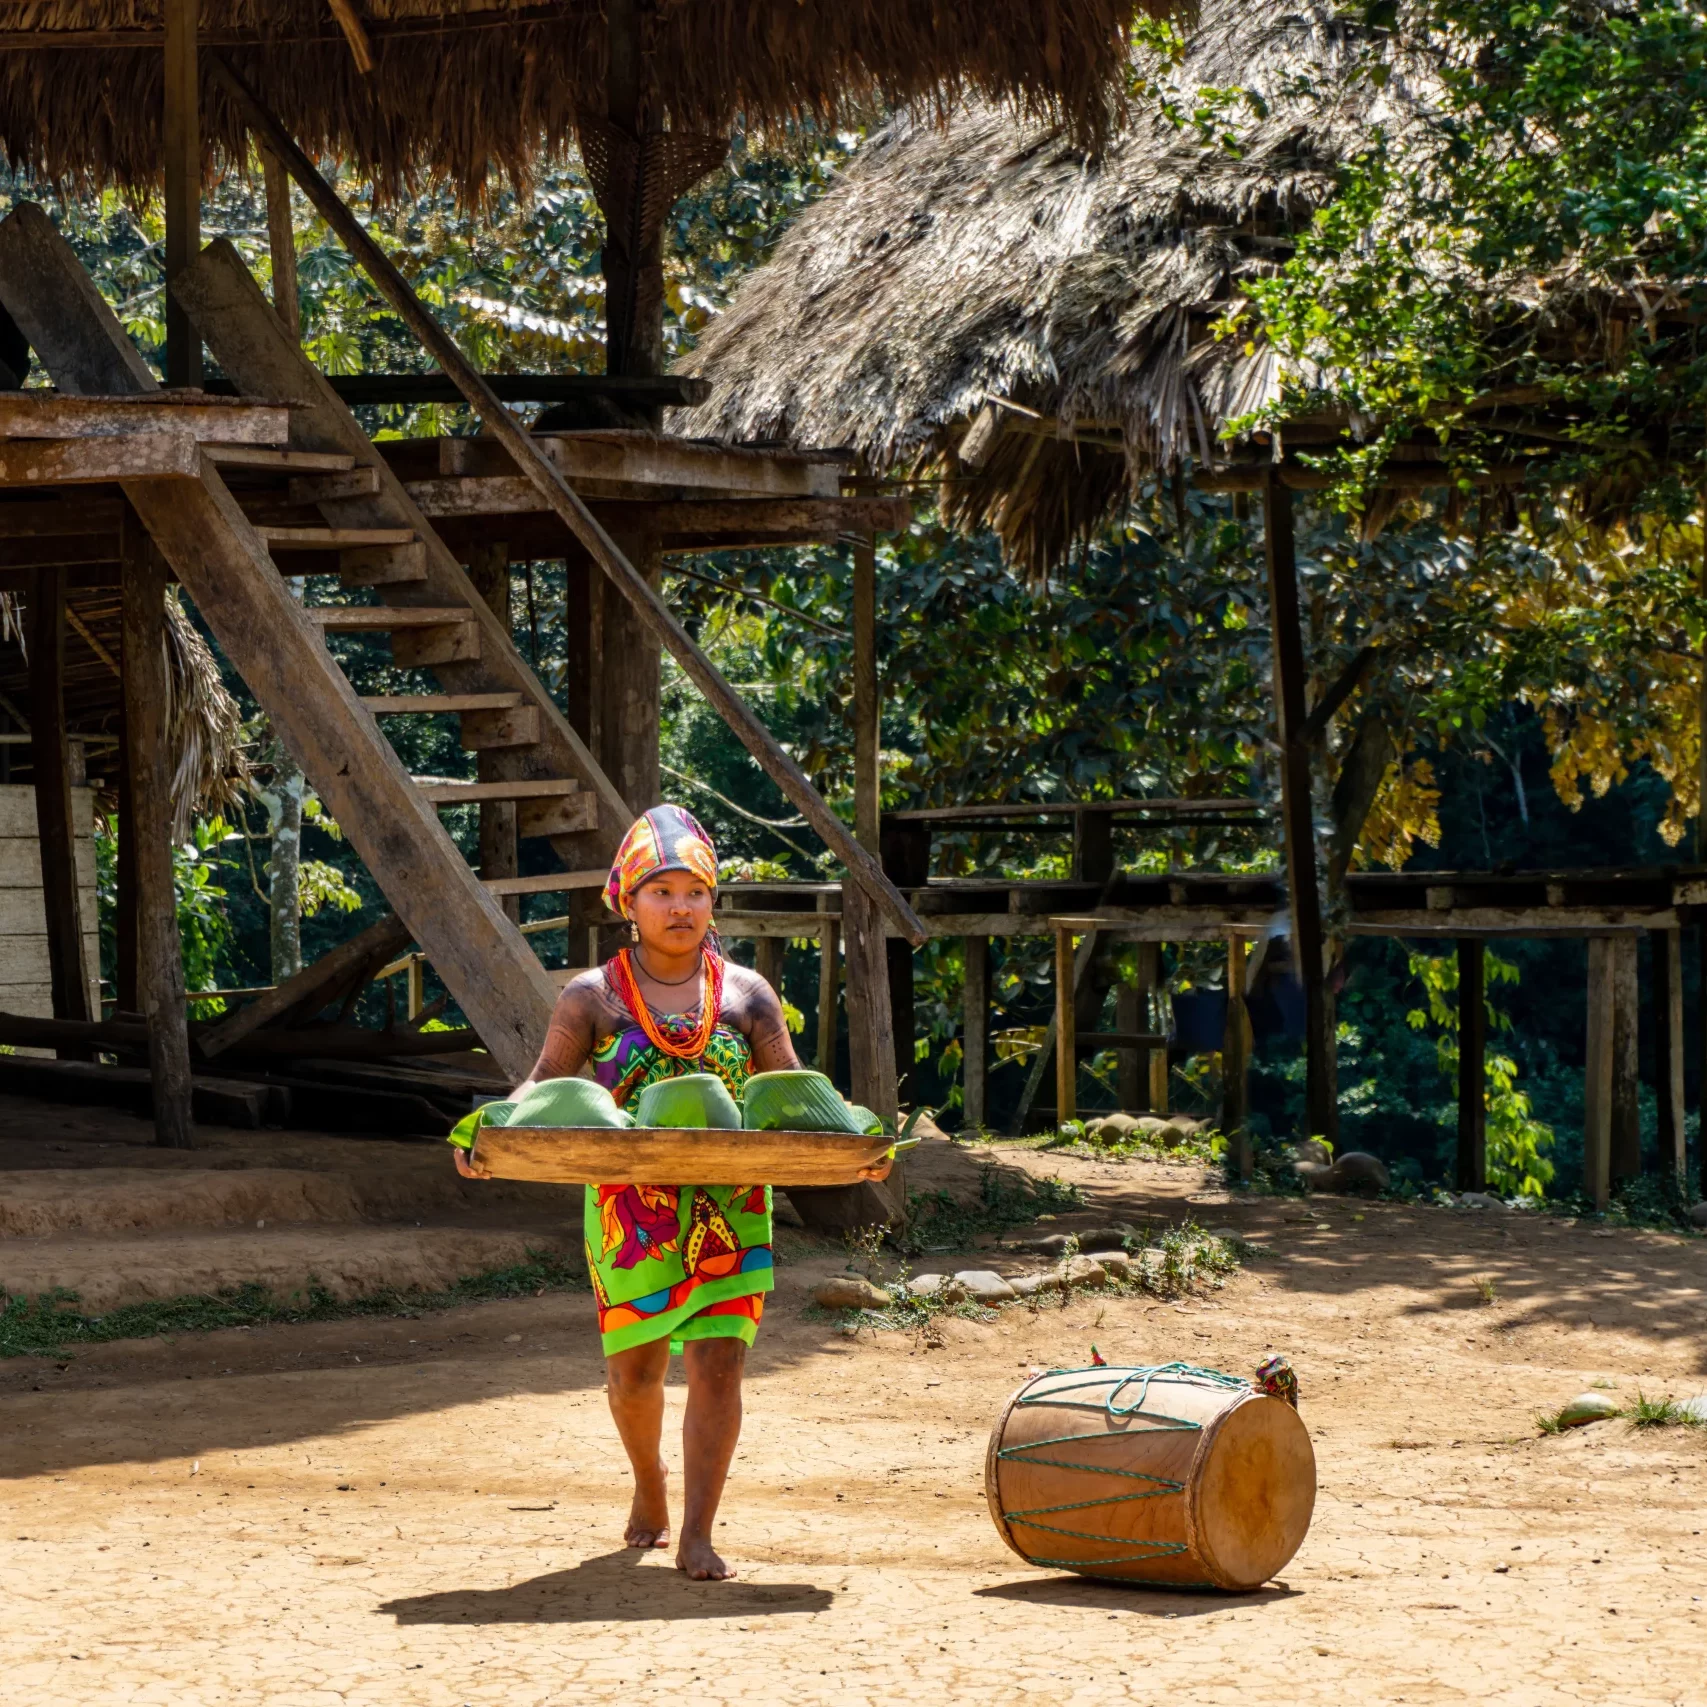 Panama - 2022: Embera Village Puru a young woman dressed in Paruma cloth brings a tray of food wrapped in banana leaves. Open air community kitchen. Embera are an indigenous people of Panama.